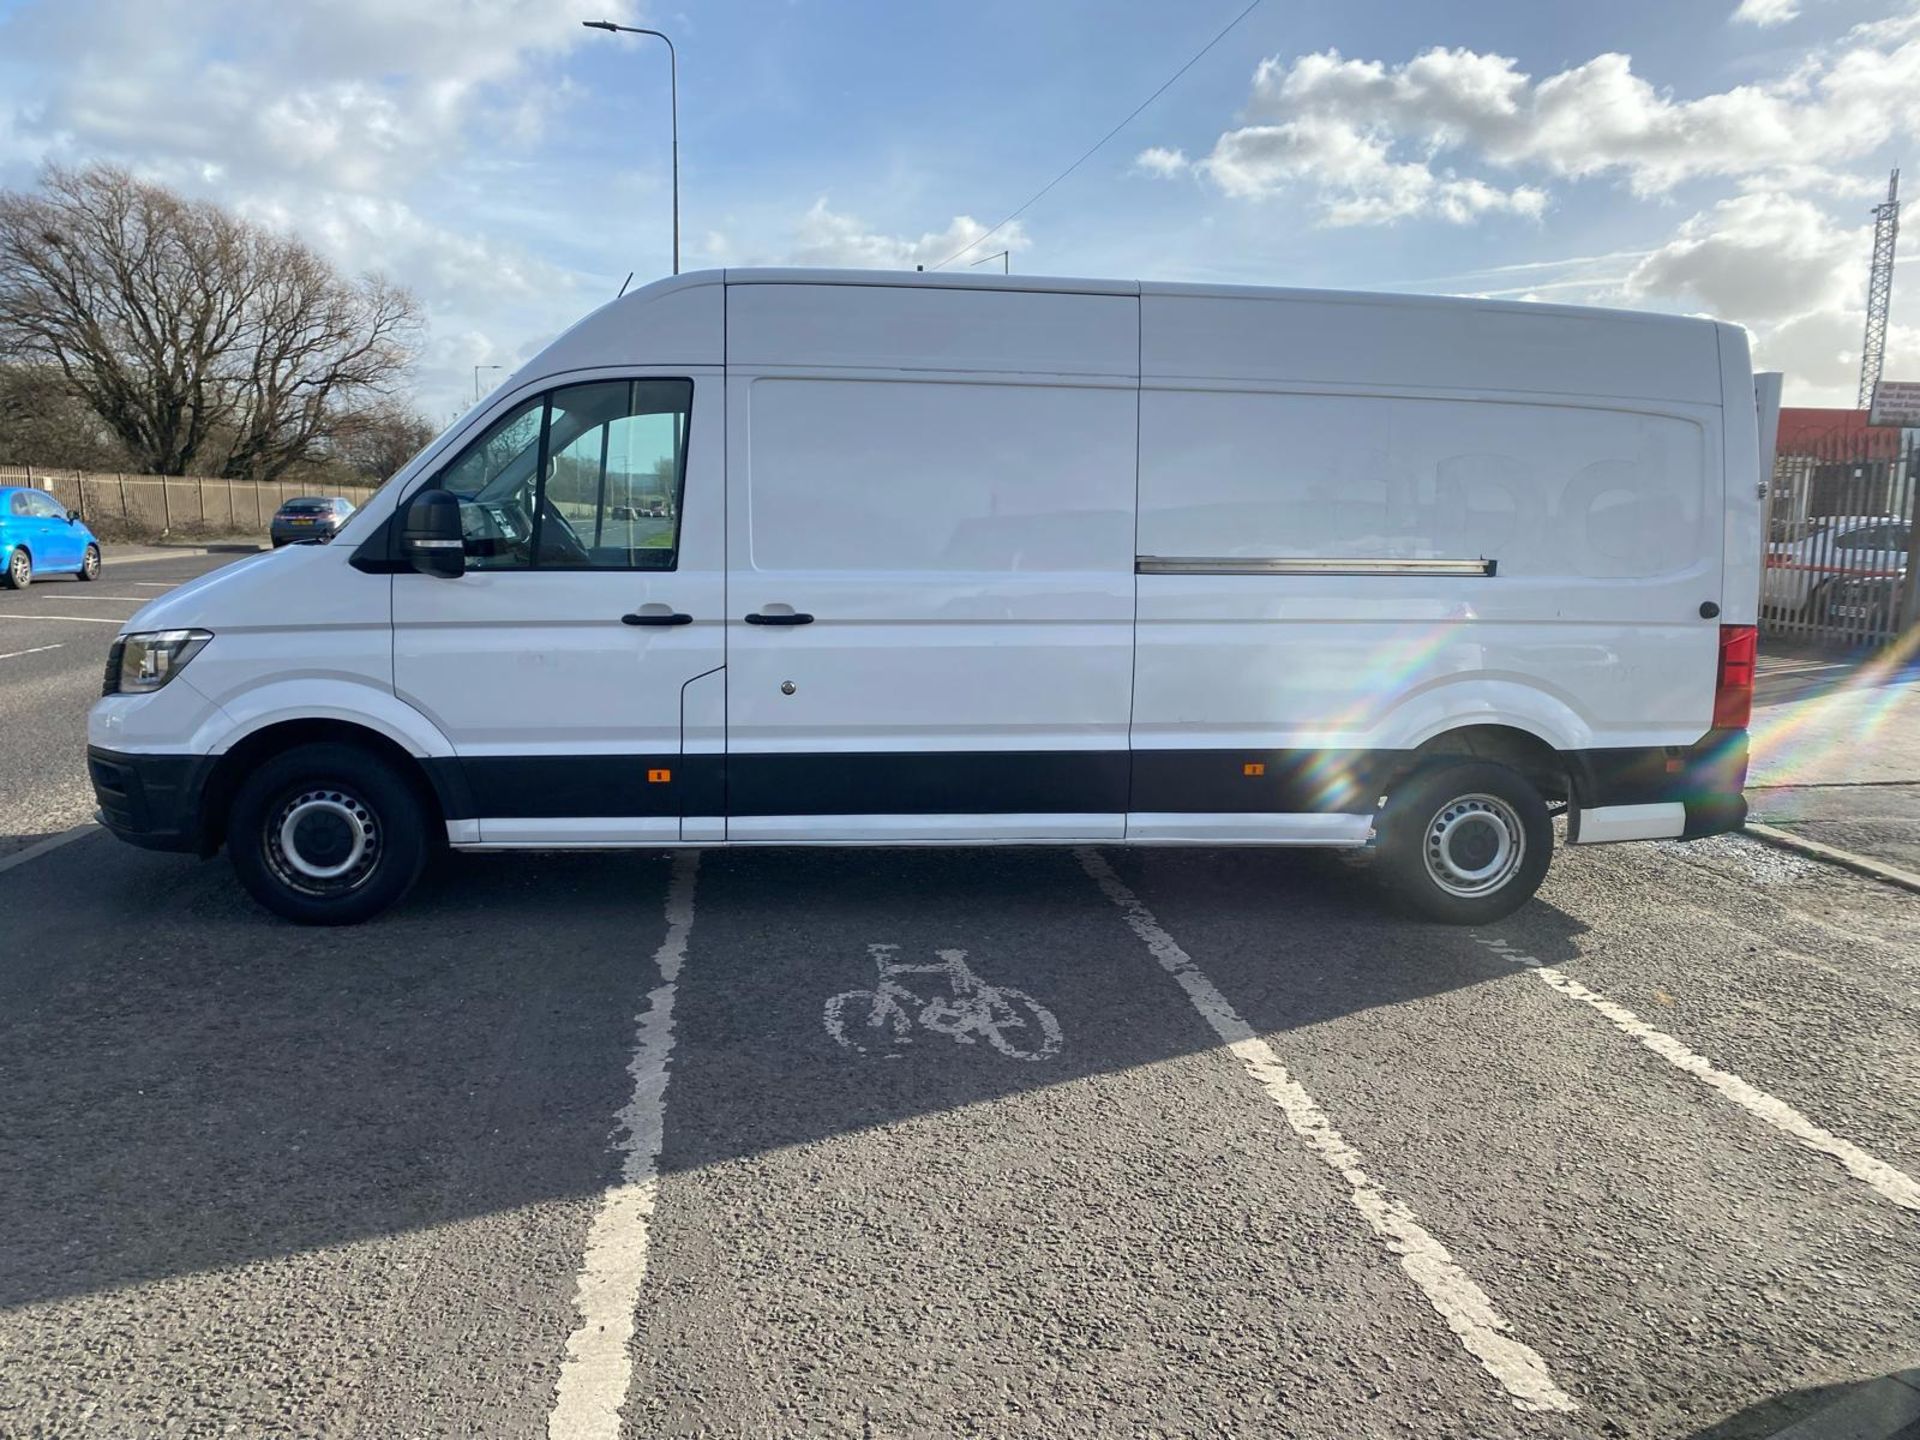 2019 69 VOLKSWAGEN CRAFTER LWB HIGH ROOF PANEL VAN - 87K MILES - PLY LINED. - Image 5 of 12